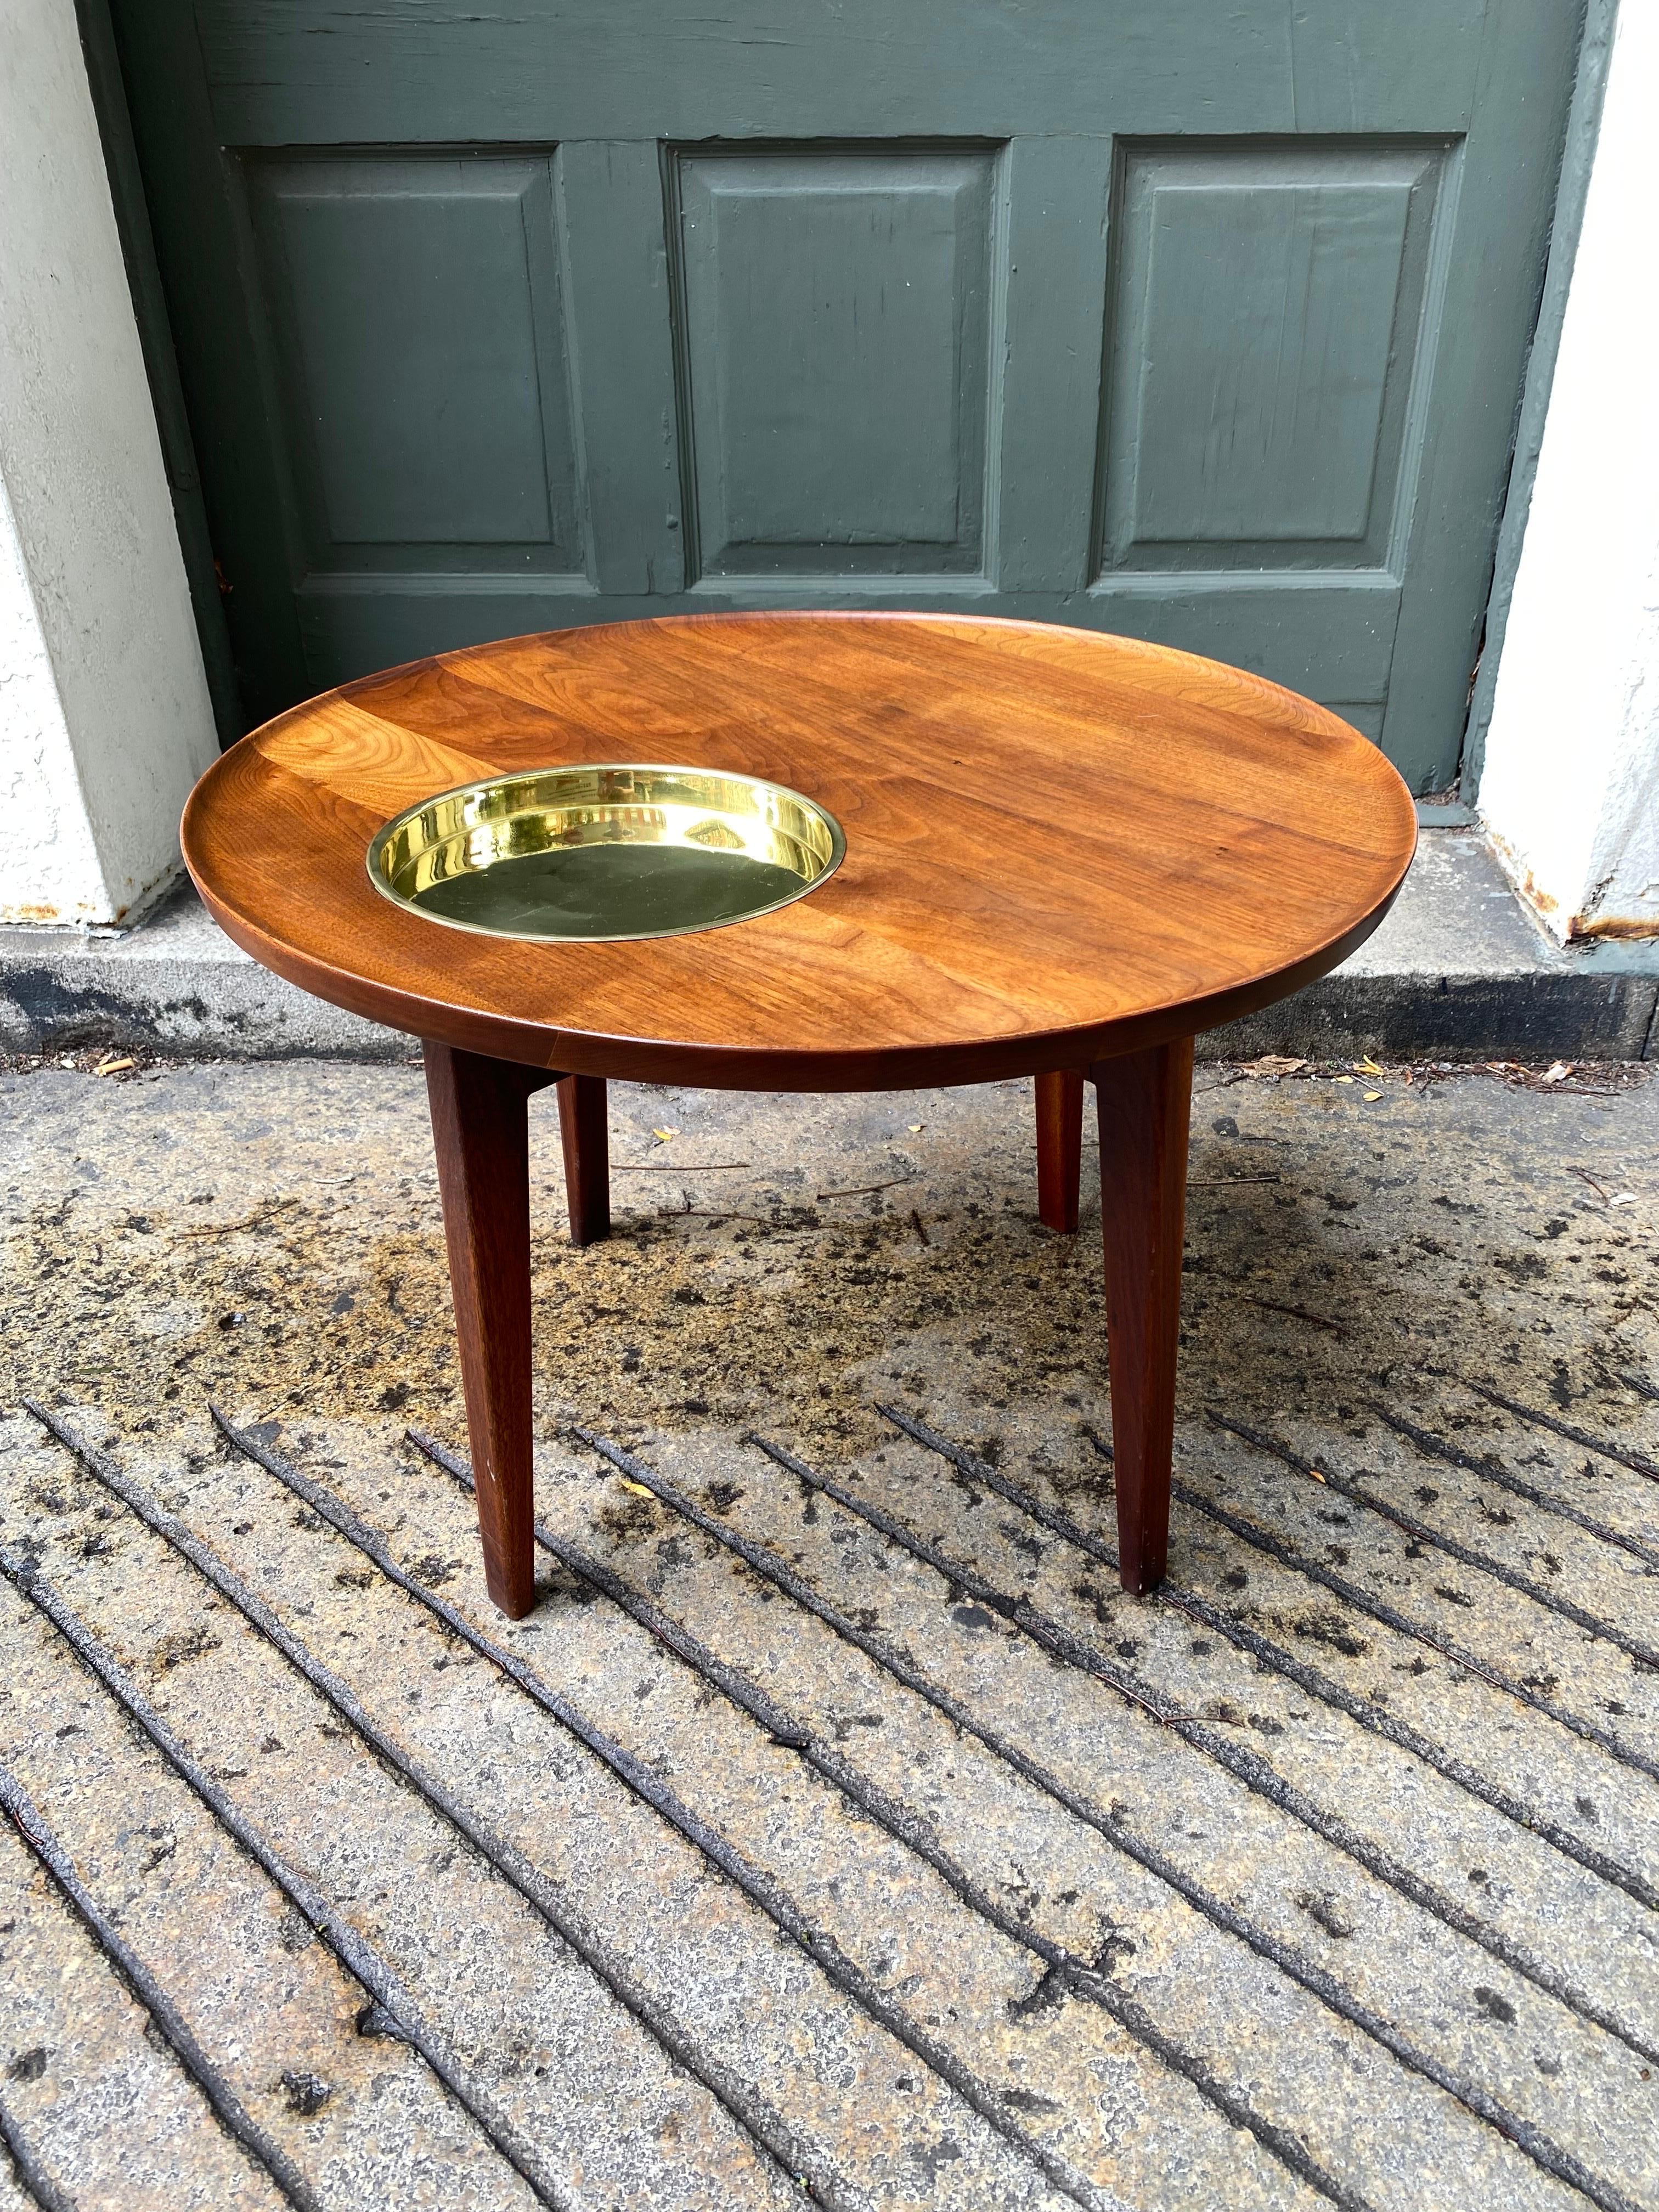 Jens Risom Solid Walnut Side Table with a Brass Dish set into top for either plants or items not to roll away!  Small lip also keeps things on the surface!  Table came as a revolving model and this style that does not spin.  Both are extremely hard